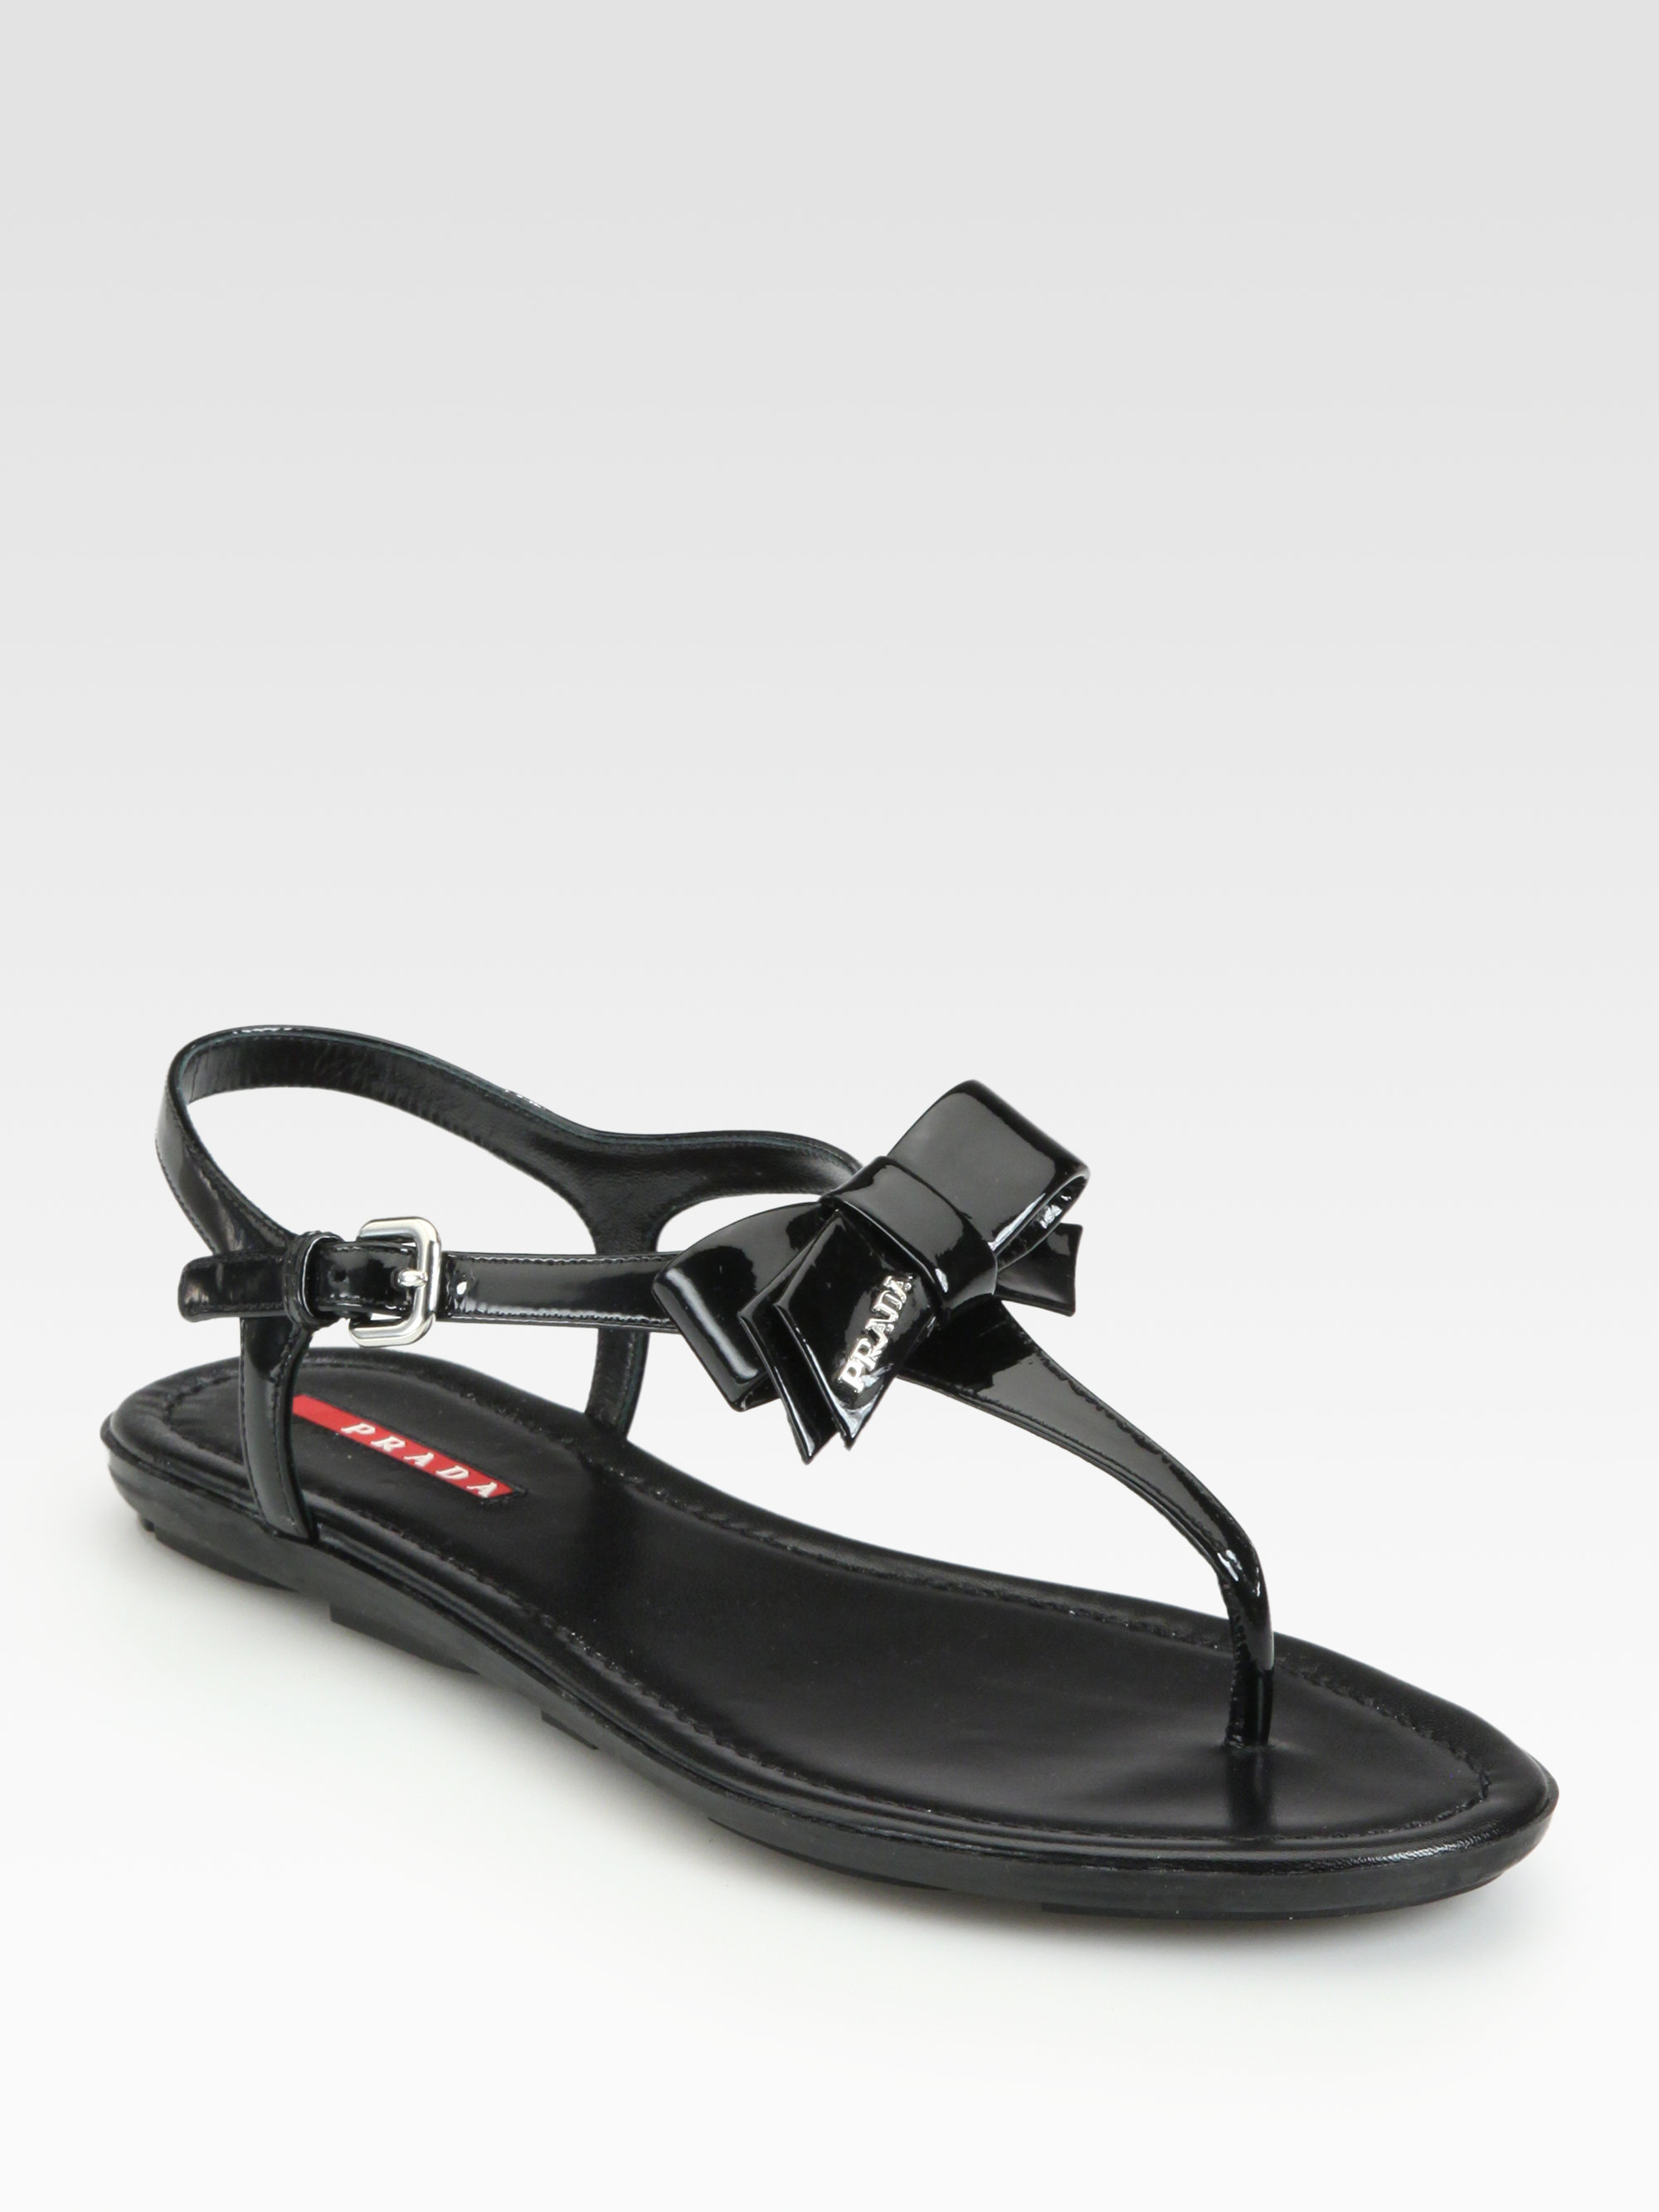 Prada Patent Leather Bow Thong Sandals in Black | Lyst